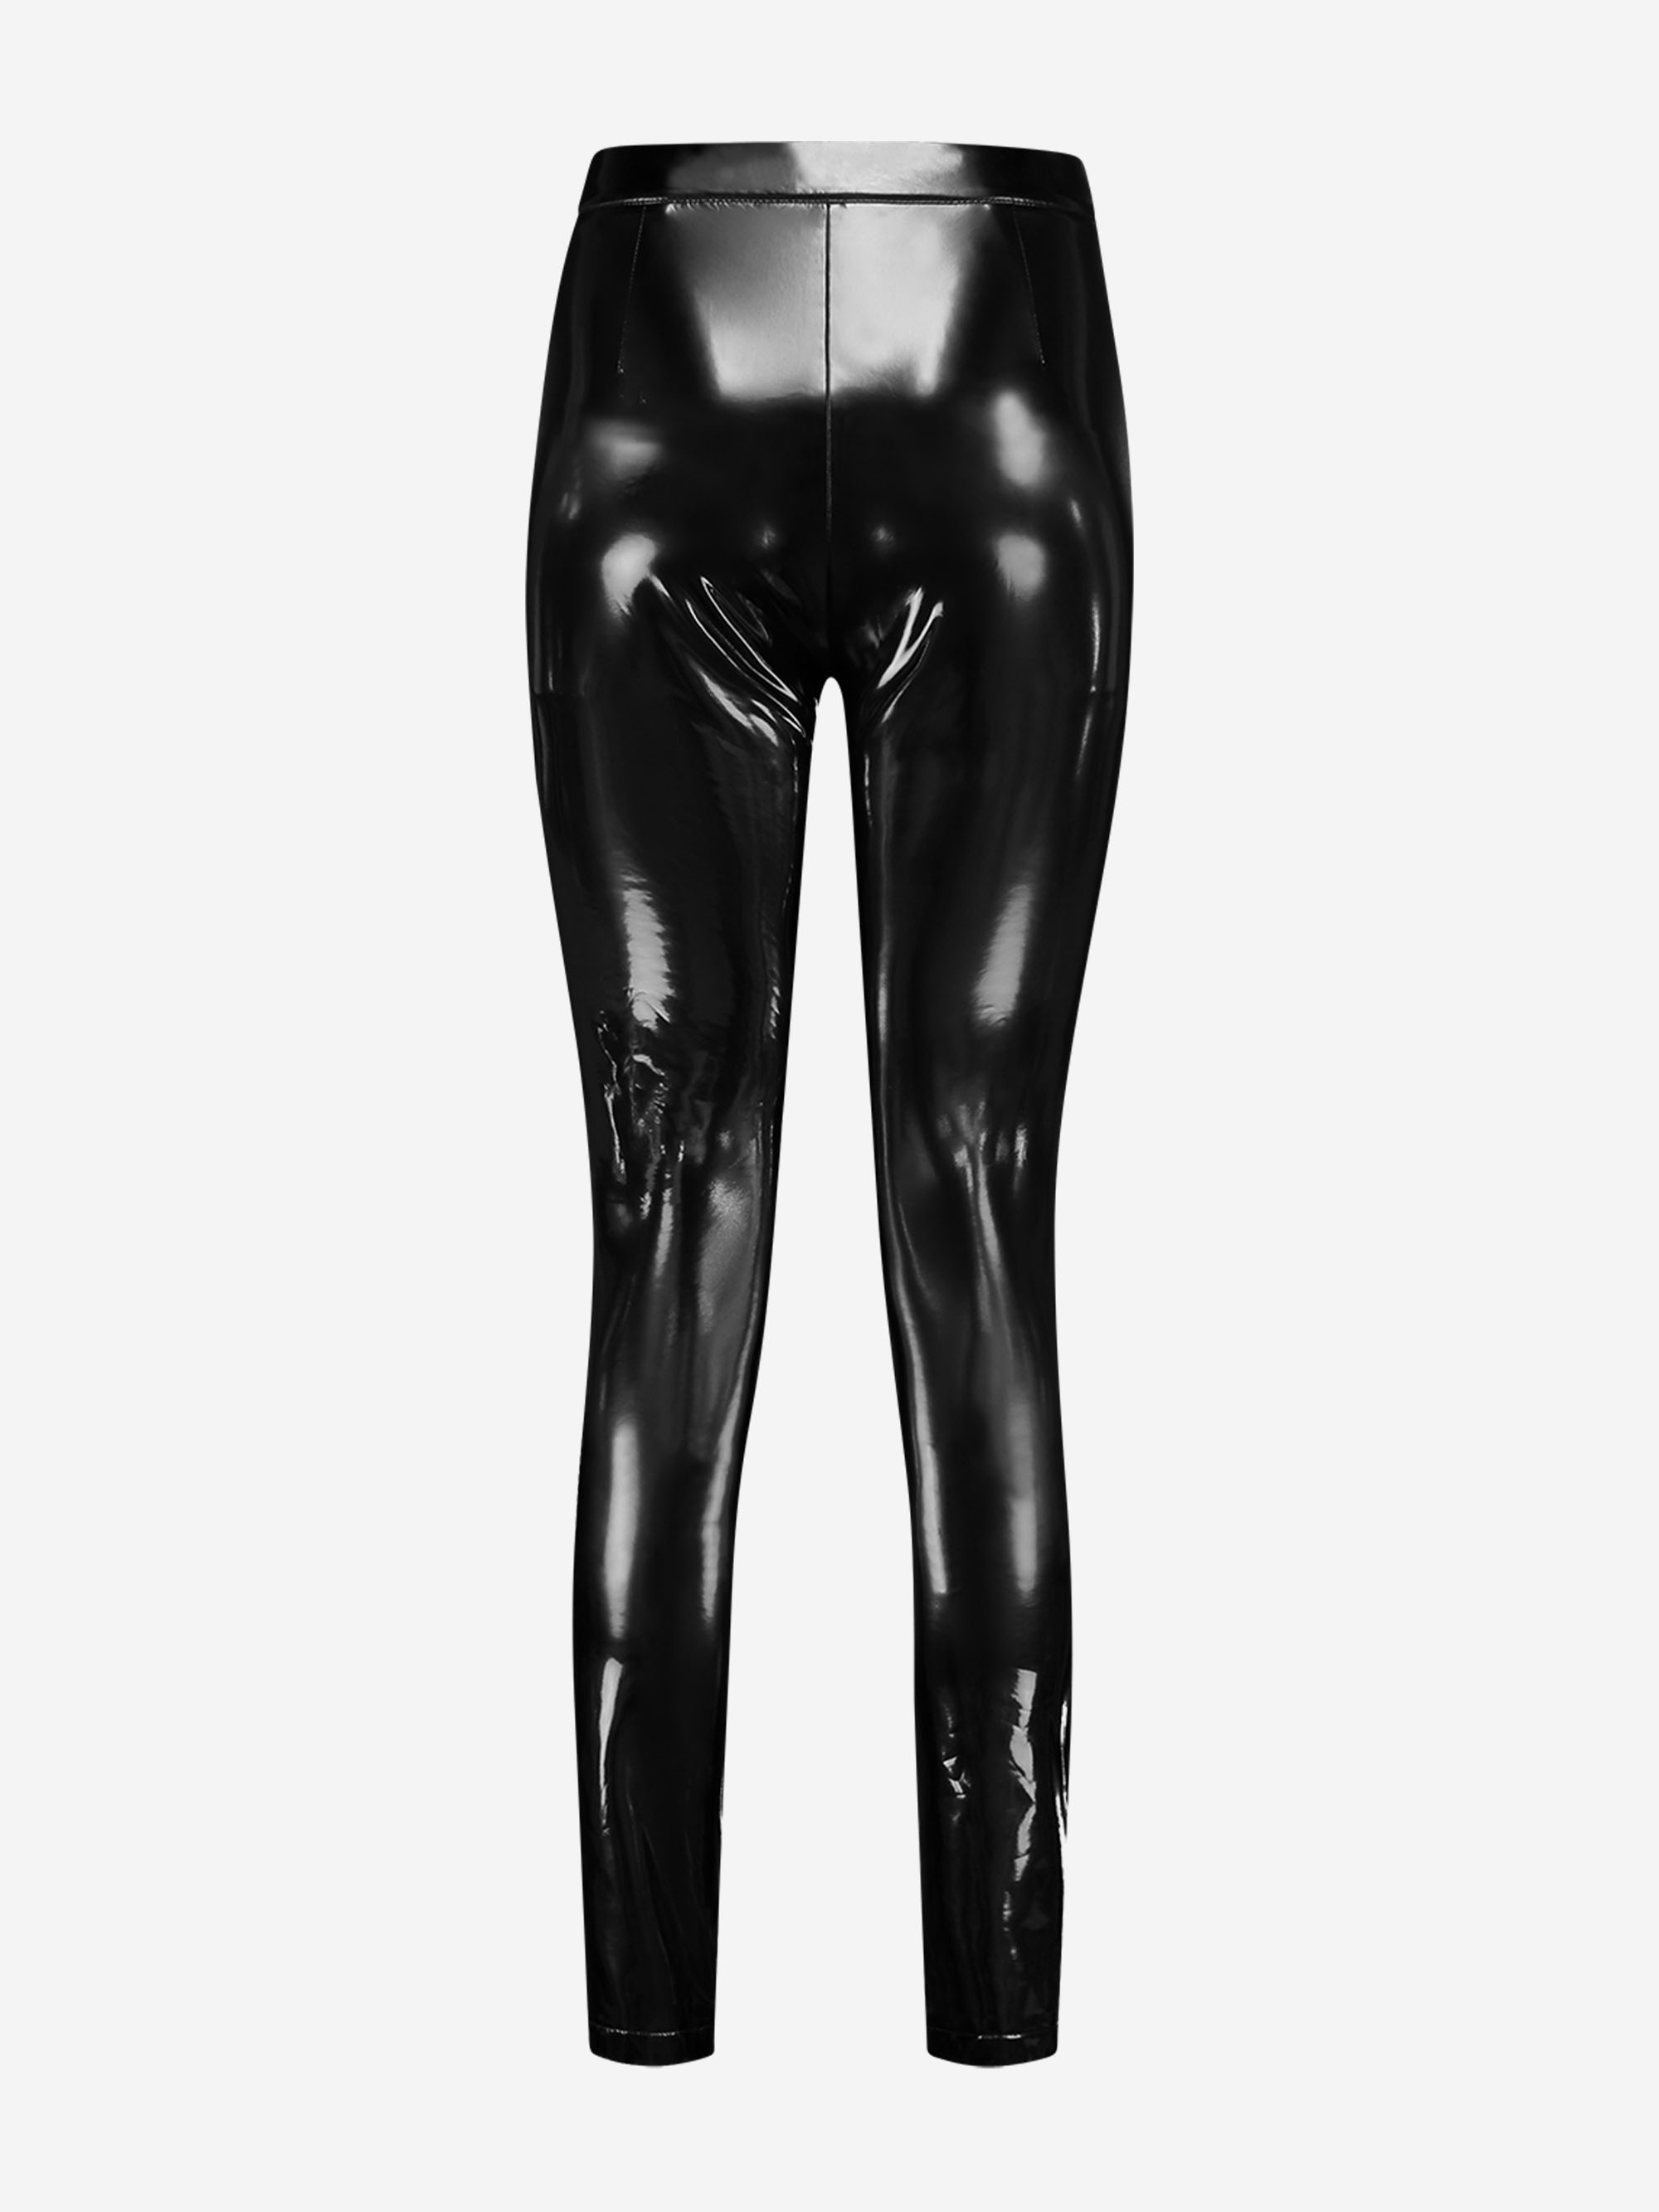 Vegan leather lacquer pants with high rise